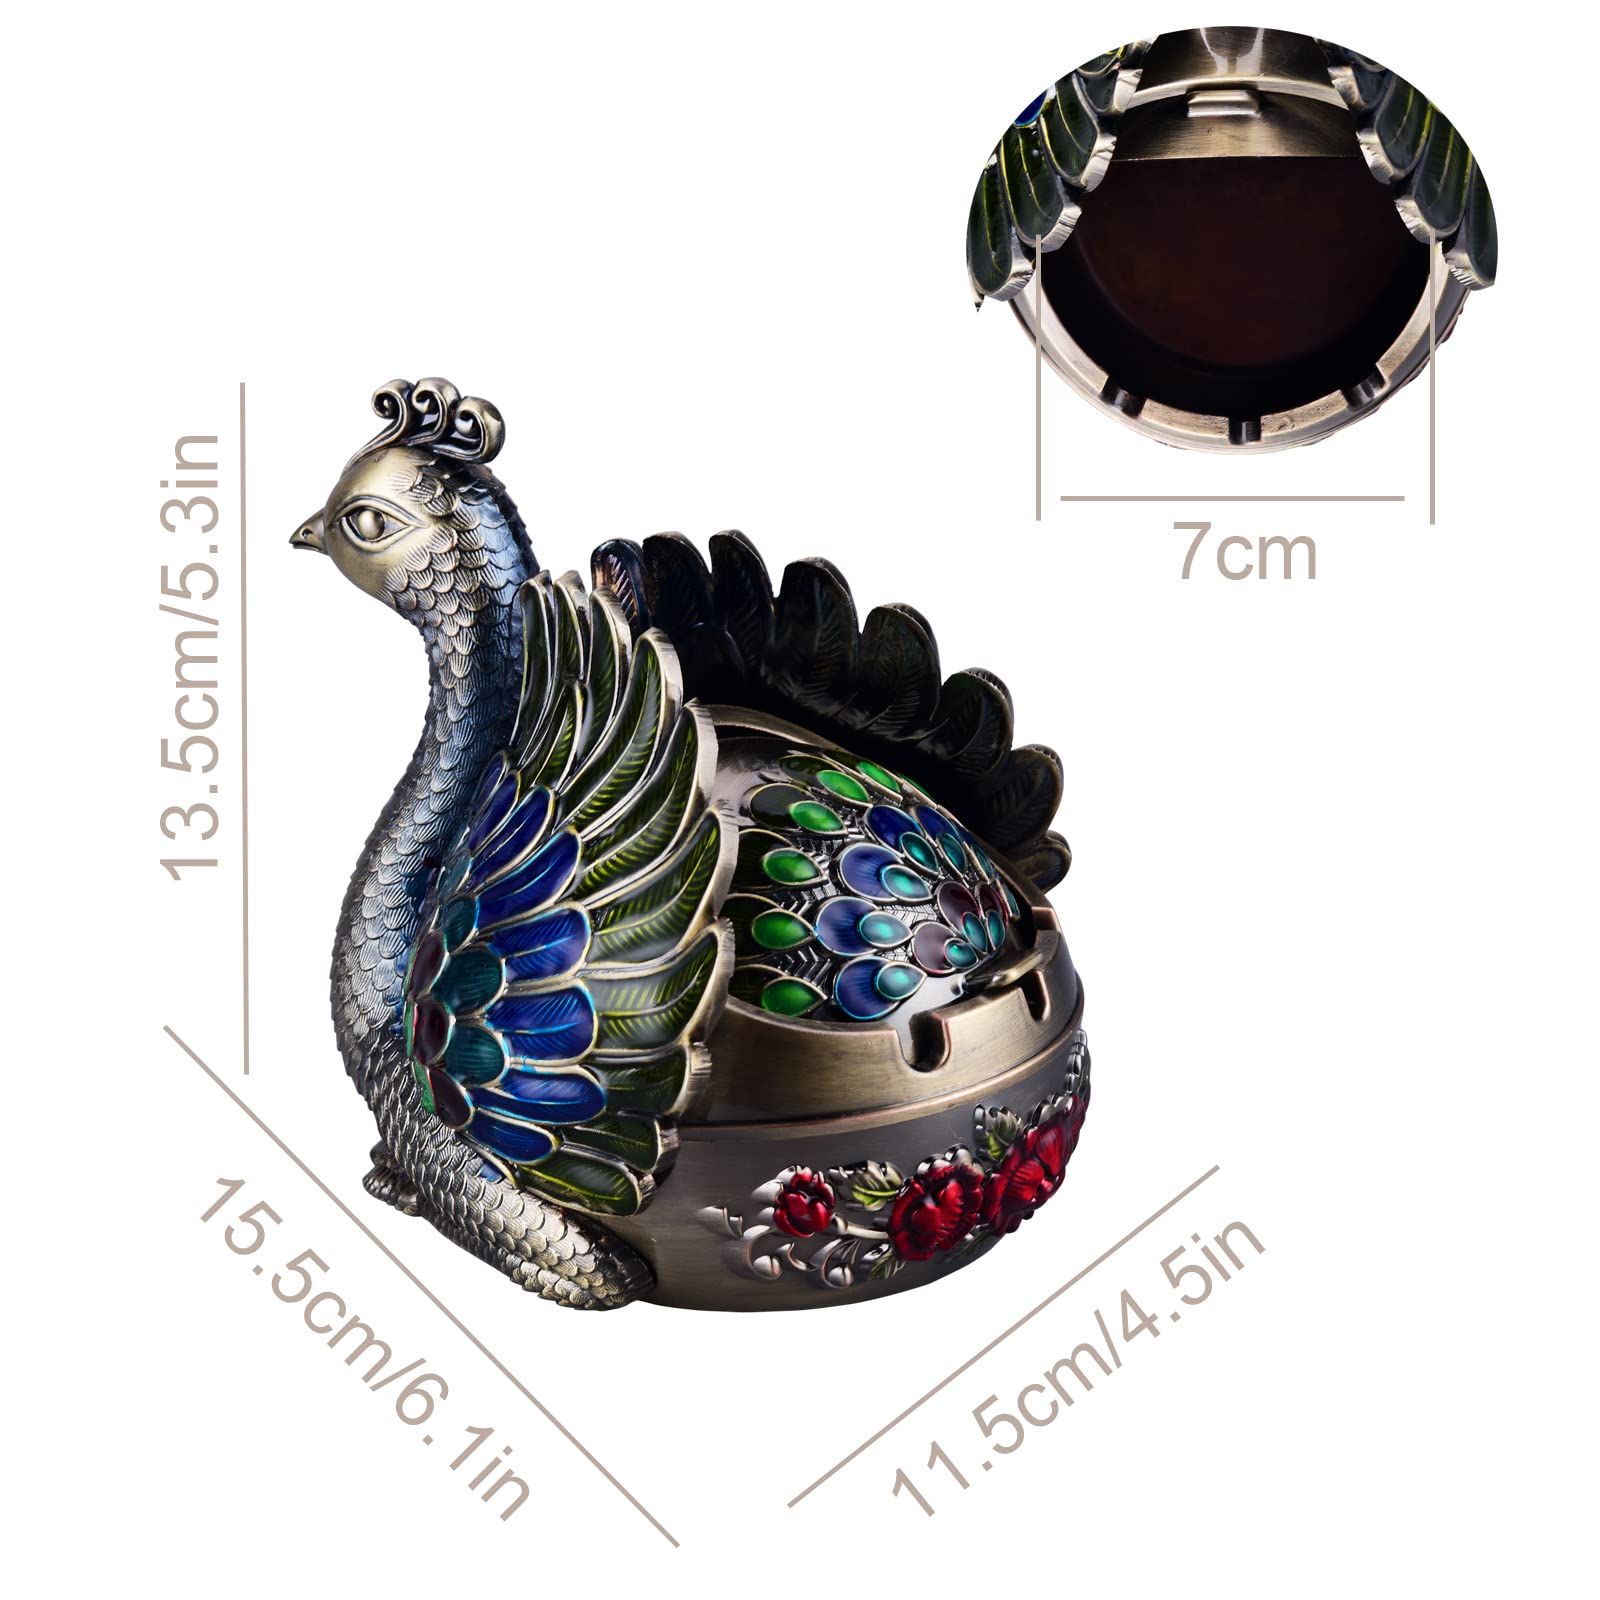 K COOL Peacock Metal Ashtray with Lid, Windproof Portable Cigarette Ashtray for Indoor or Outdoor Use, Ash Holder for Smokers, Desktop Smoking Ash Tray for Patio Porch Reception Decoration (Bronze)